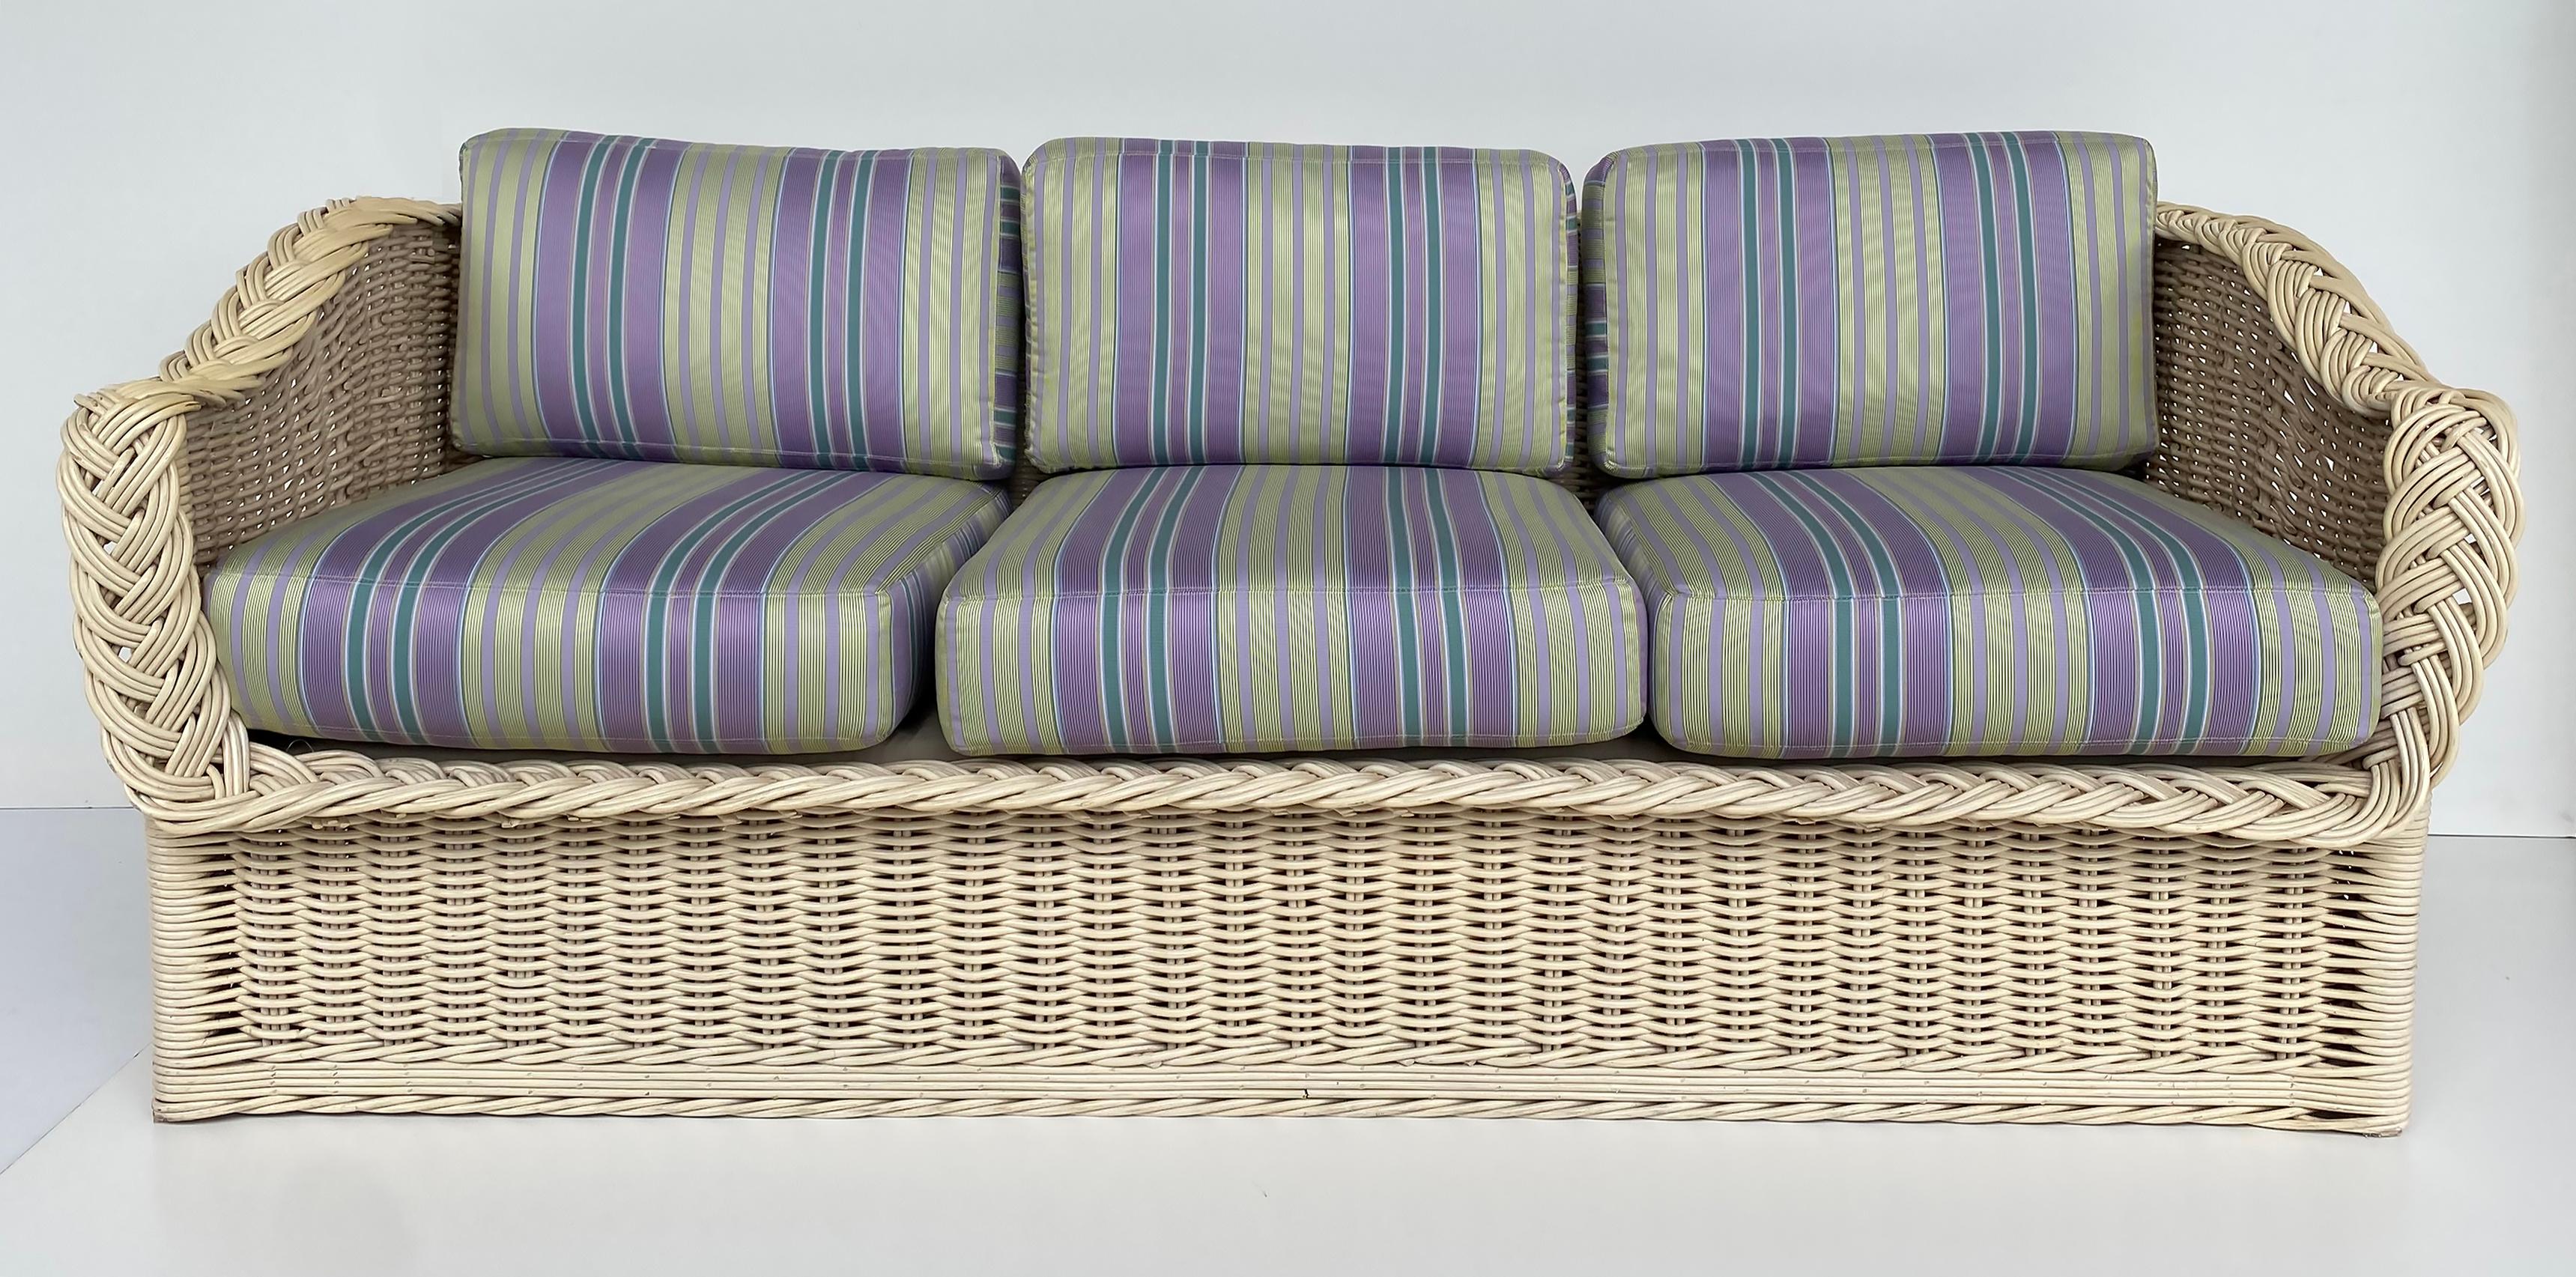 Henry Link Newly Upholstered Painted Coastal Rattan Sofa 

Offered for sale is a Henry Link coastal beach living newly upholstered 3-seater rattan sofa.  The cushions have been upholstered with Lee Jofa fabric. The rattan frame has a painted